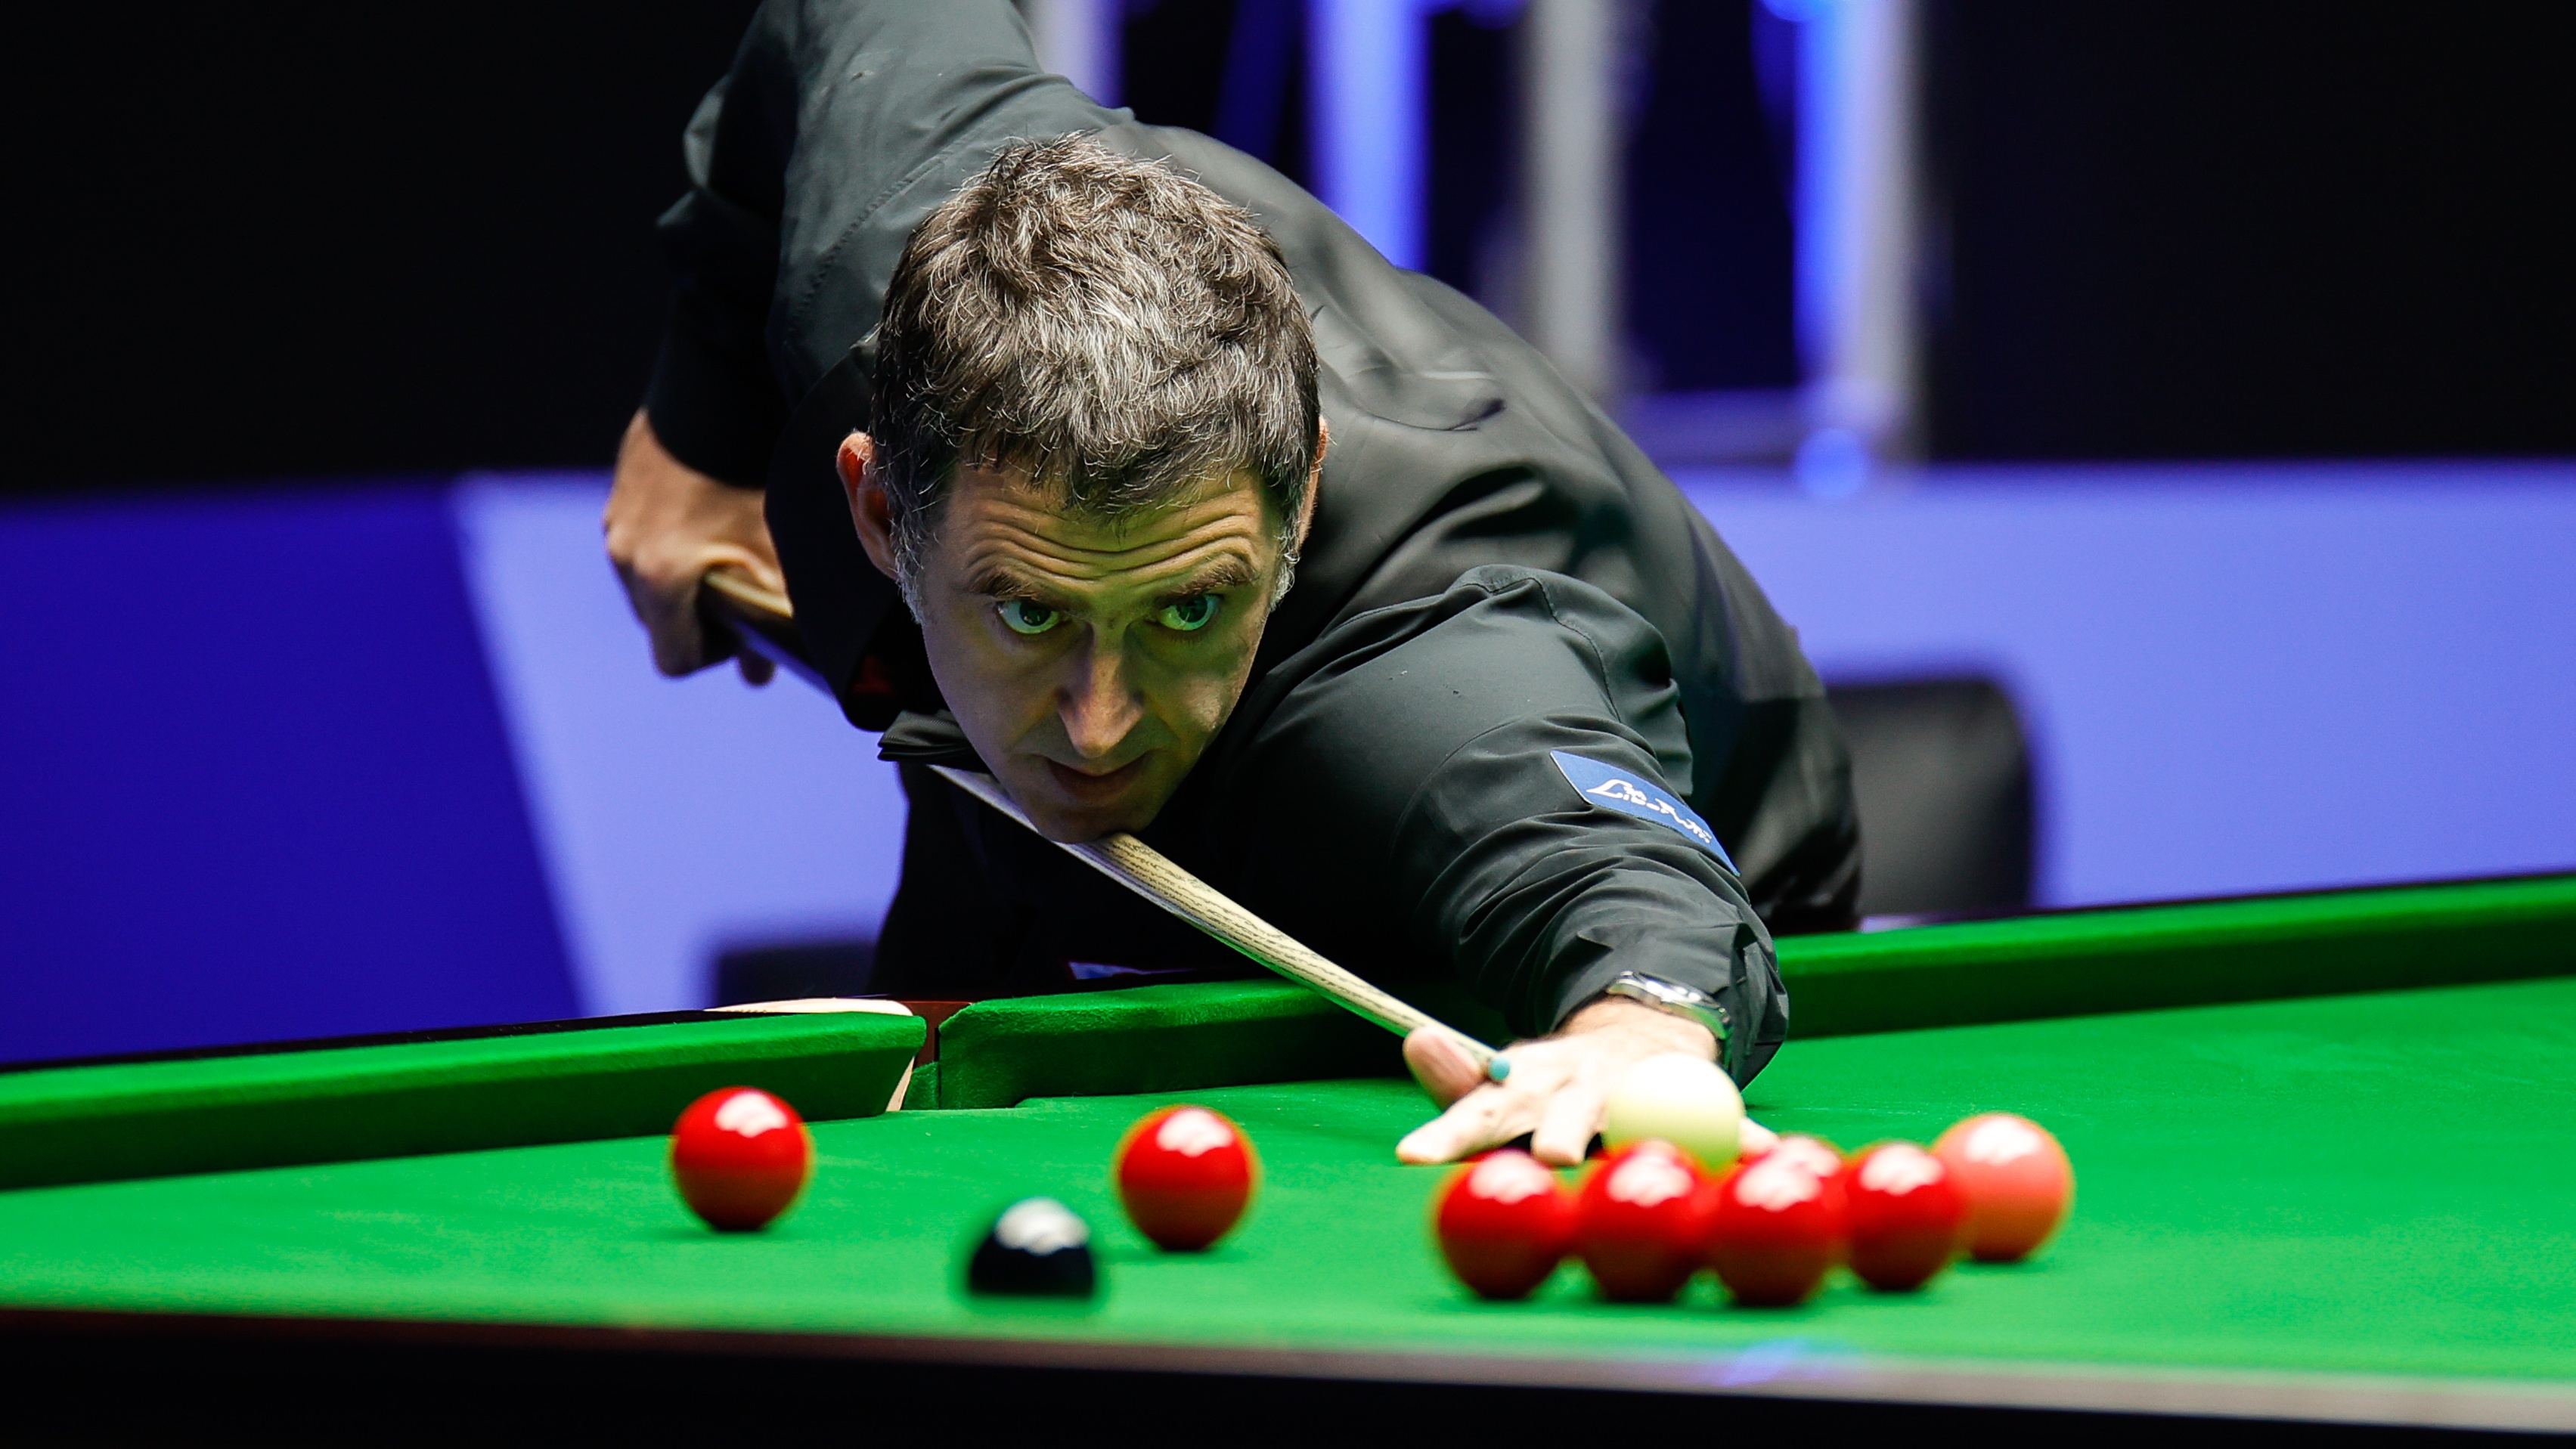 How to watch UK Championship final 2023 live stream Ronnie OSullivan vs Ding Junhui online from anywhere What to Watch